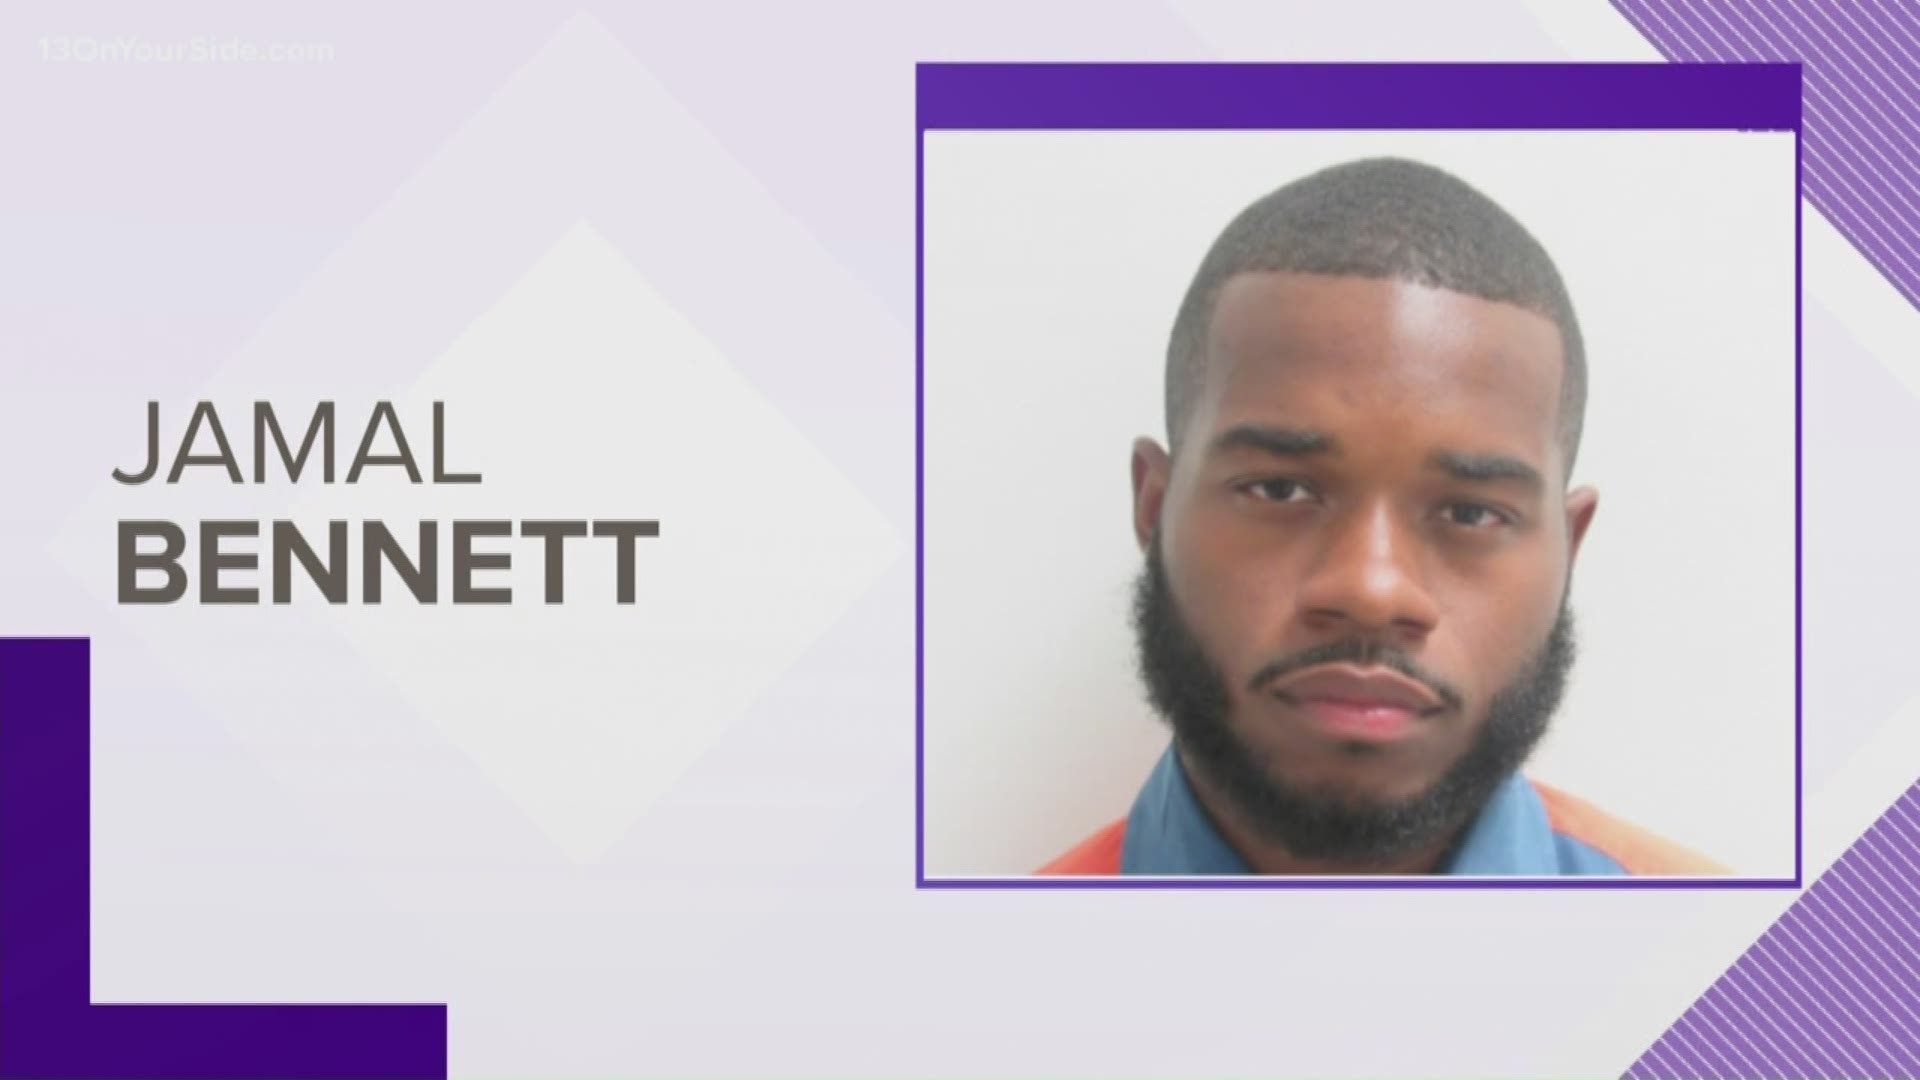 Jamal Bennett is serving a 32-year prison sentence for the fatal shooting of another man during a fight at a Grand Rapids party.